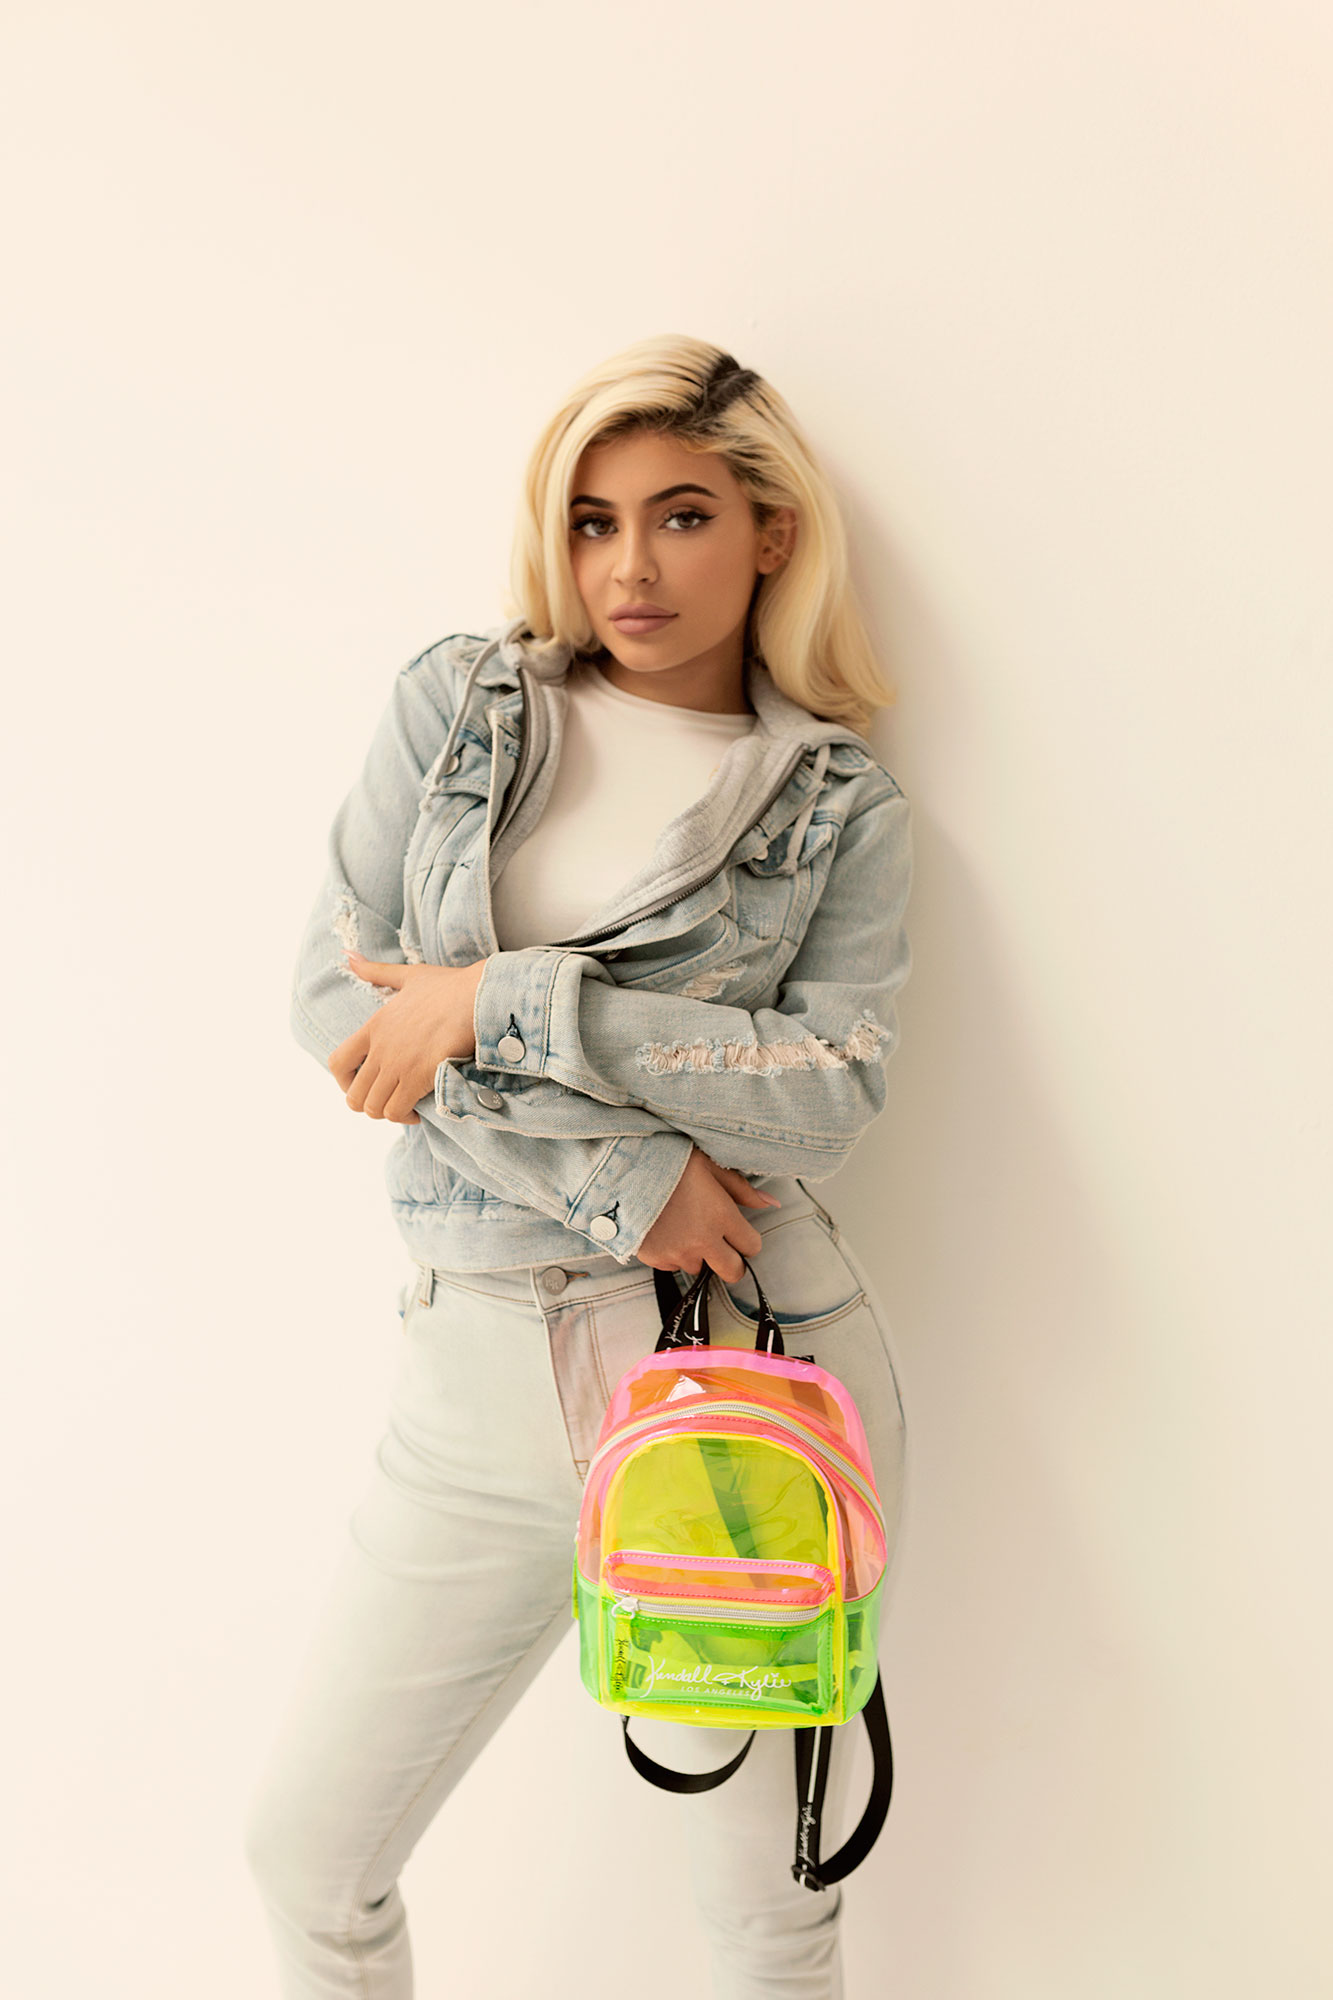 Kylie Jenner Shows Us How to Style the New Kendall x Kylie Handbag Collection